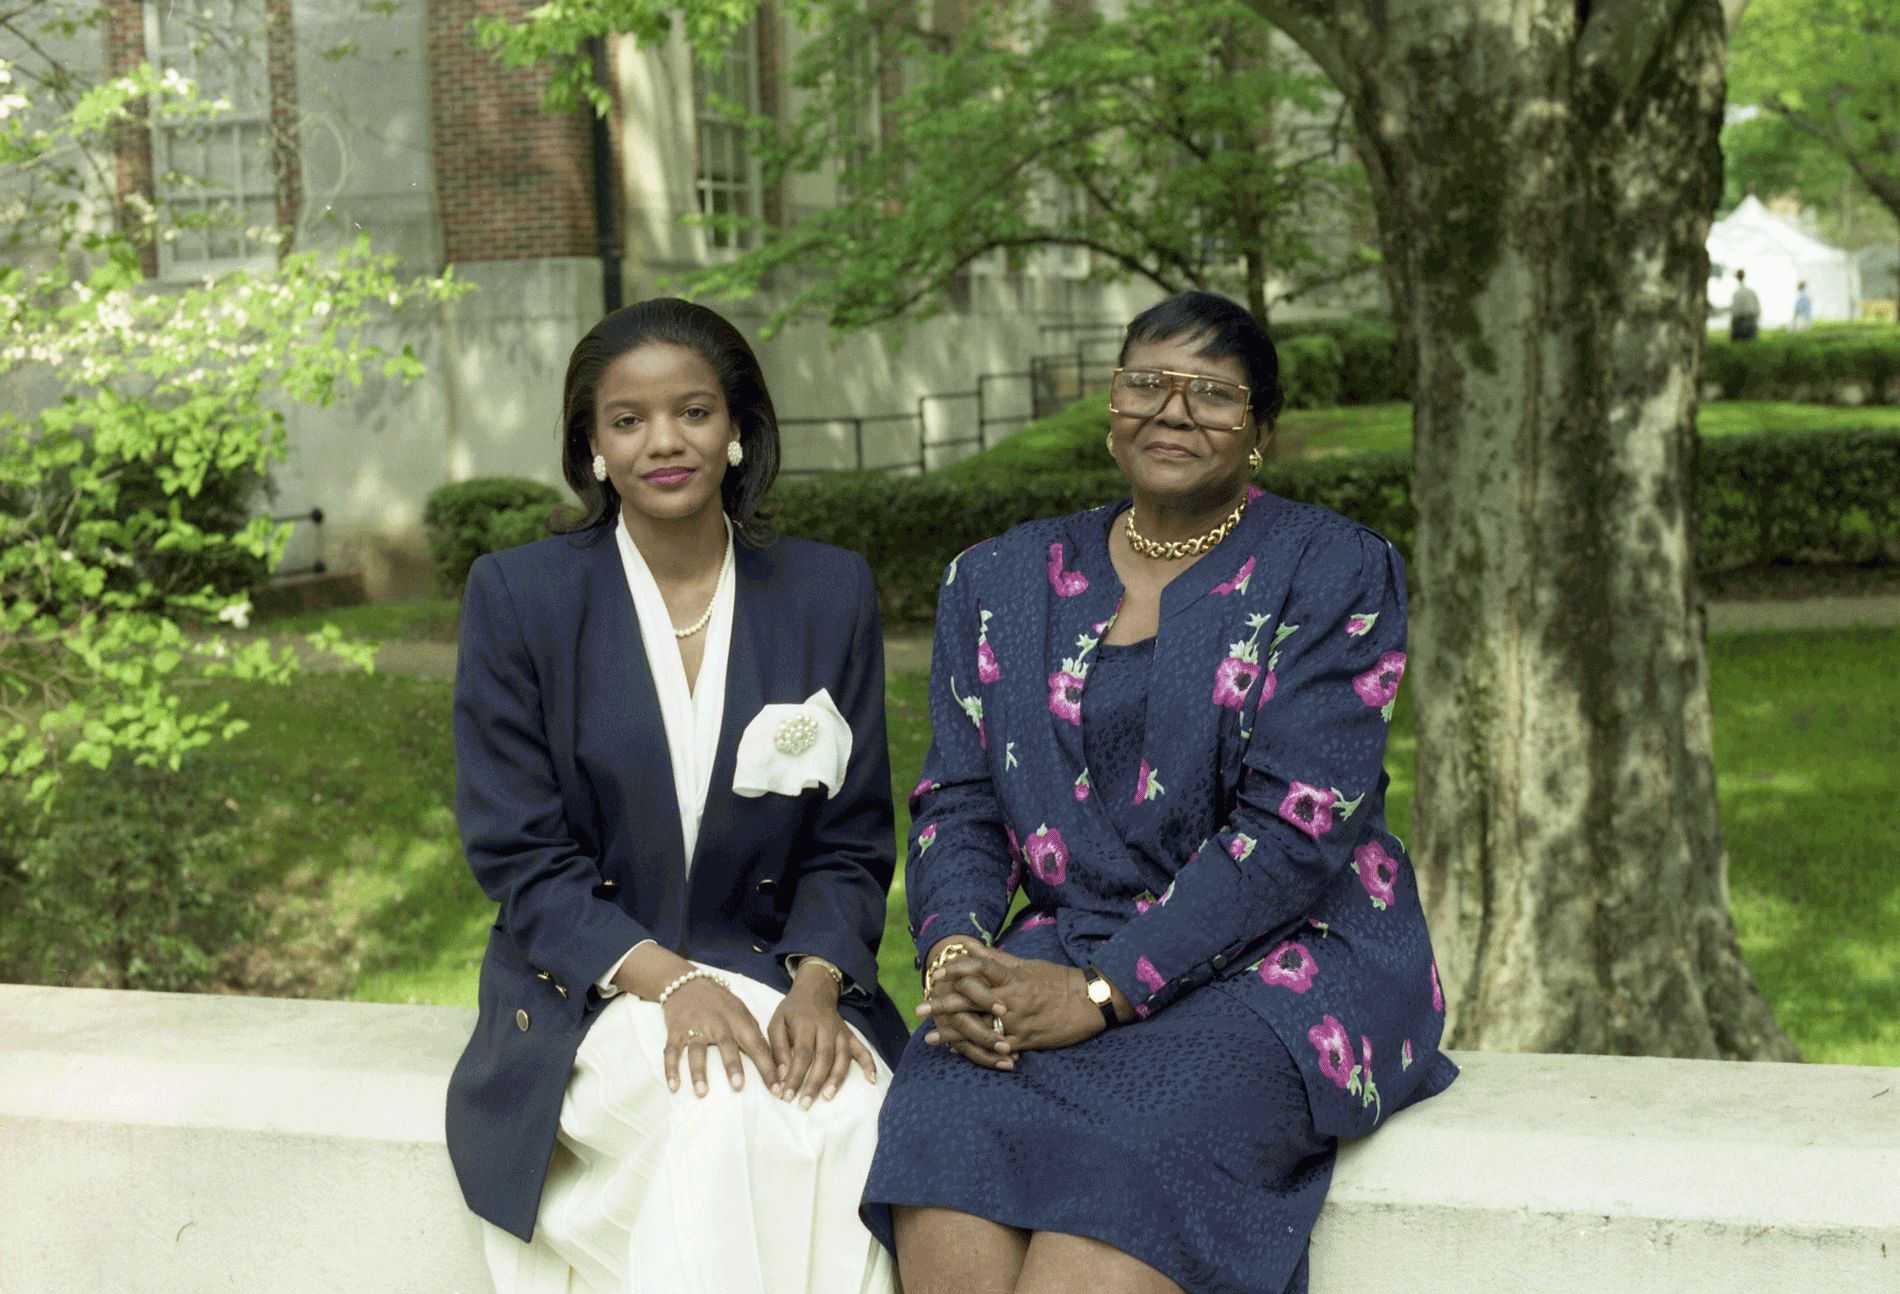 Autherine Lucy Foster with her daughter, Grazia, on campus